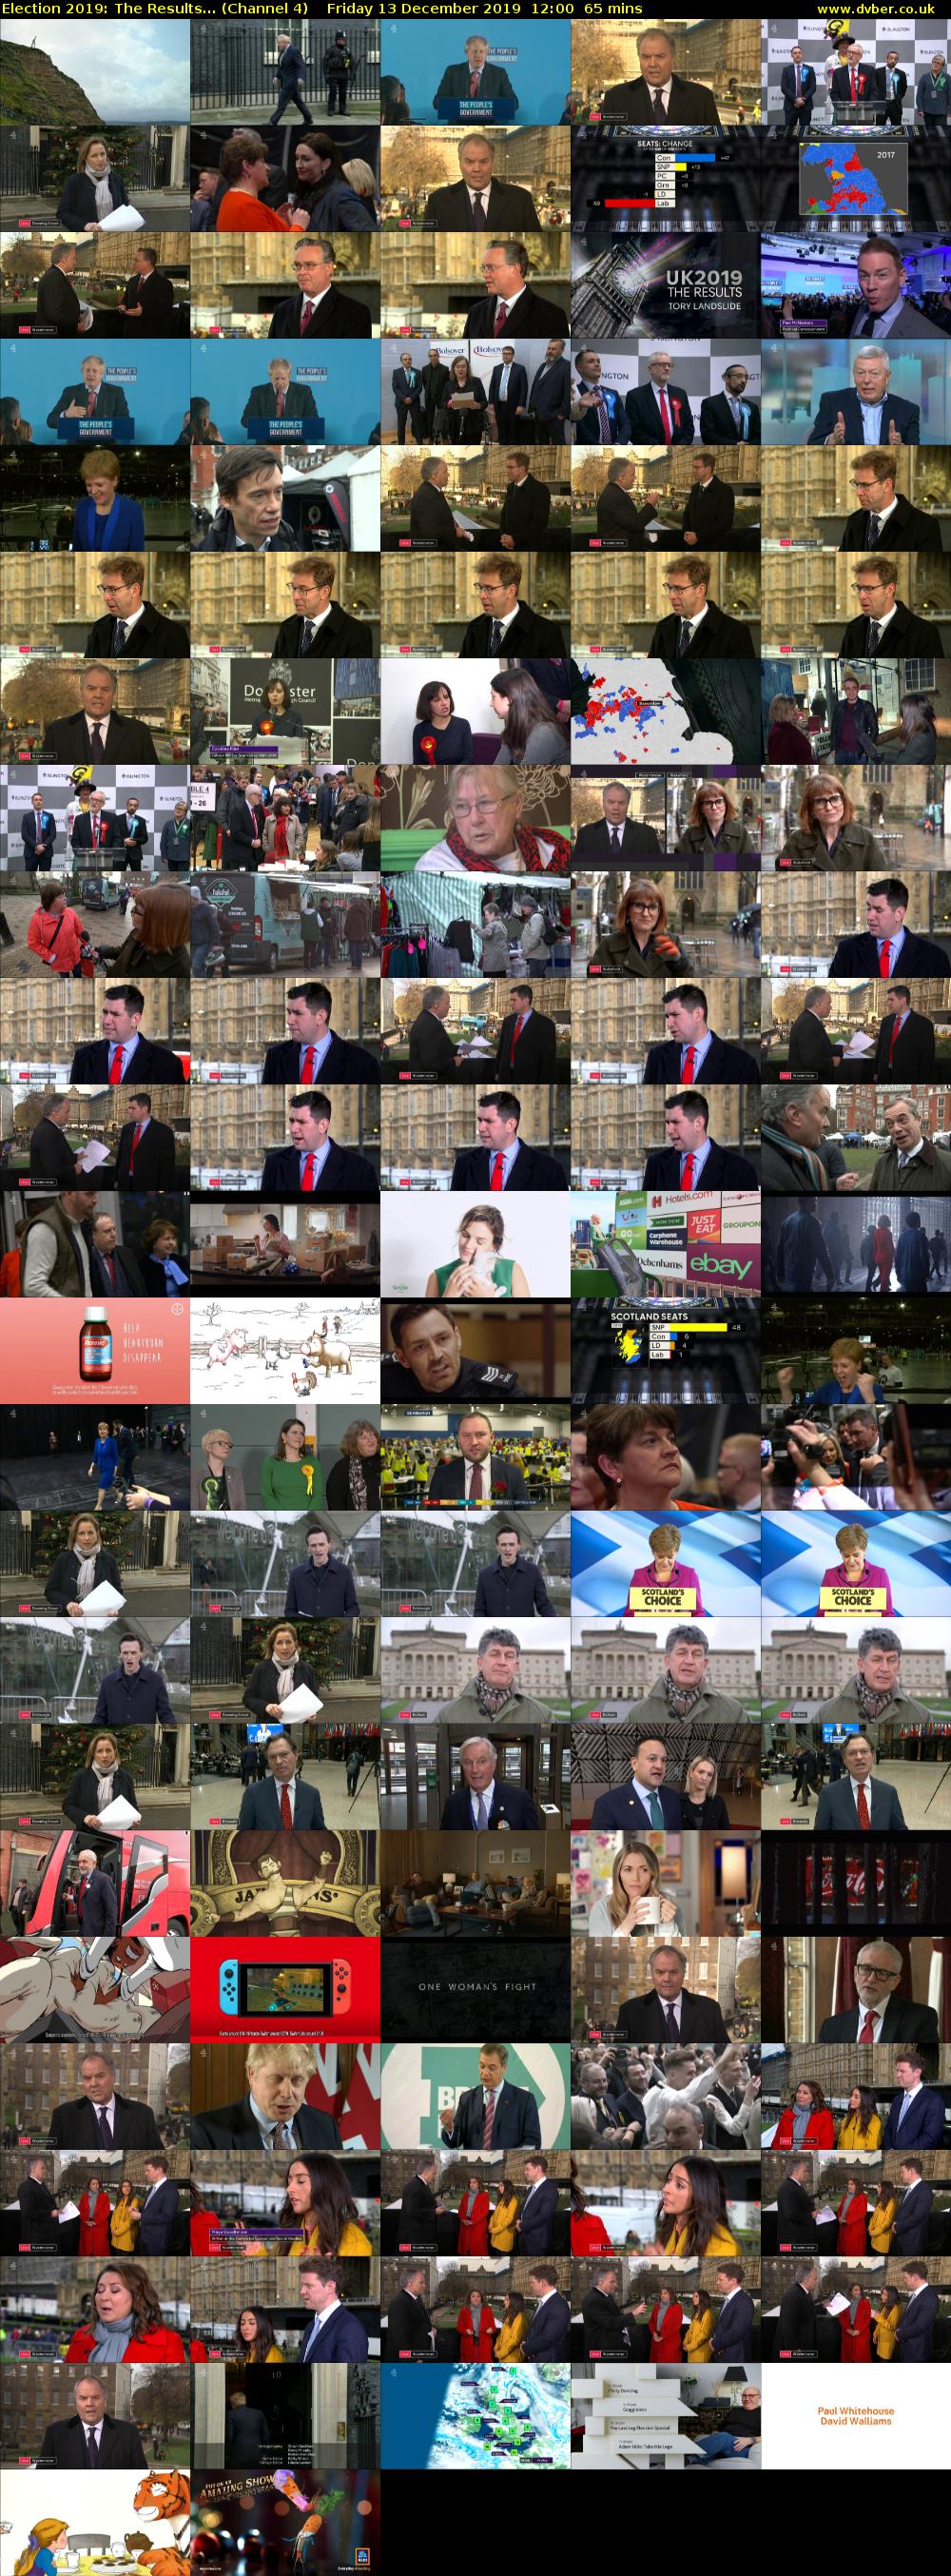 Election 2019: The Results... (Channel 4) Friday 13 December 2019 12:00 - 13:05